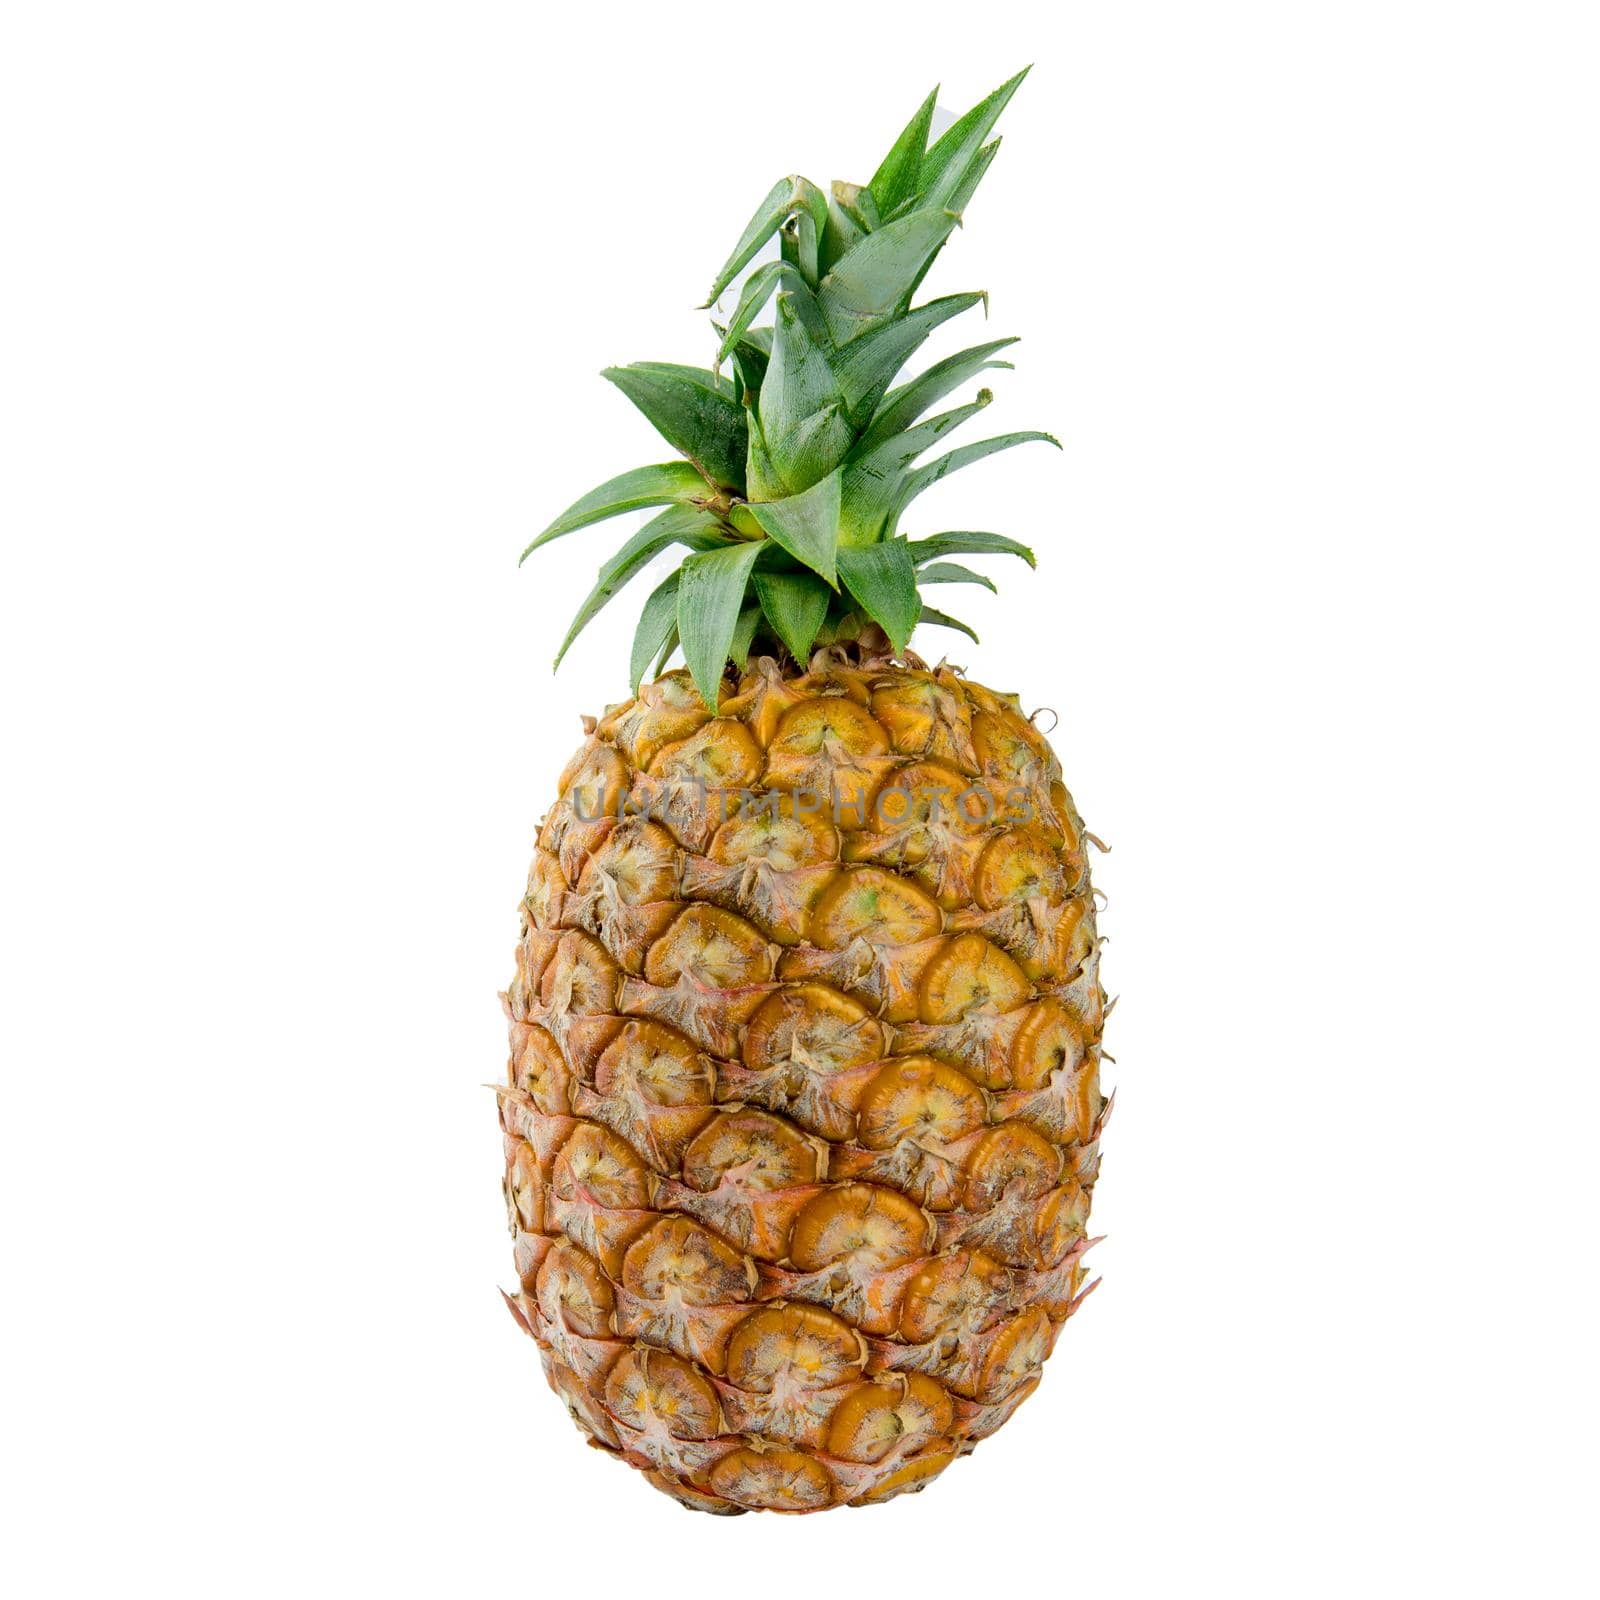 Pineapple on isolated white background. Food and vegetable concept. Clipping path use by MiniStocker